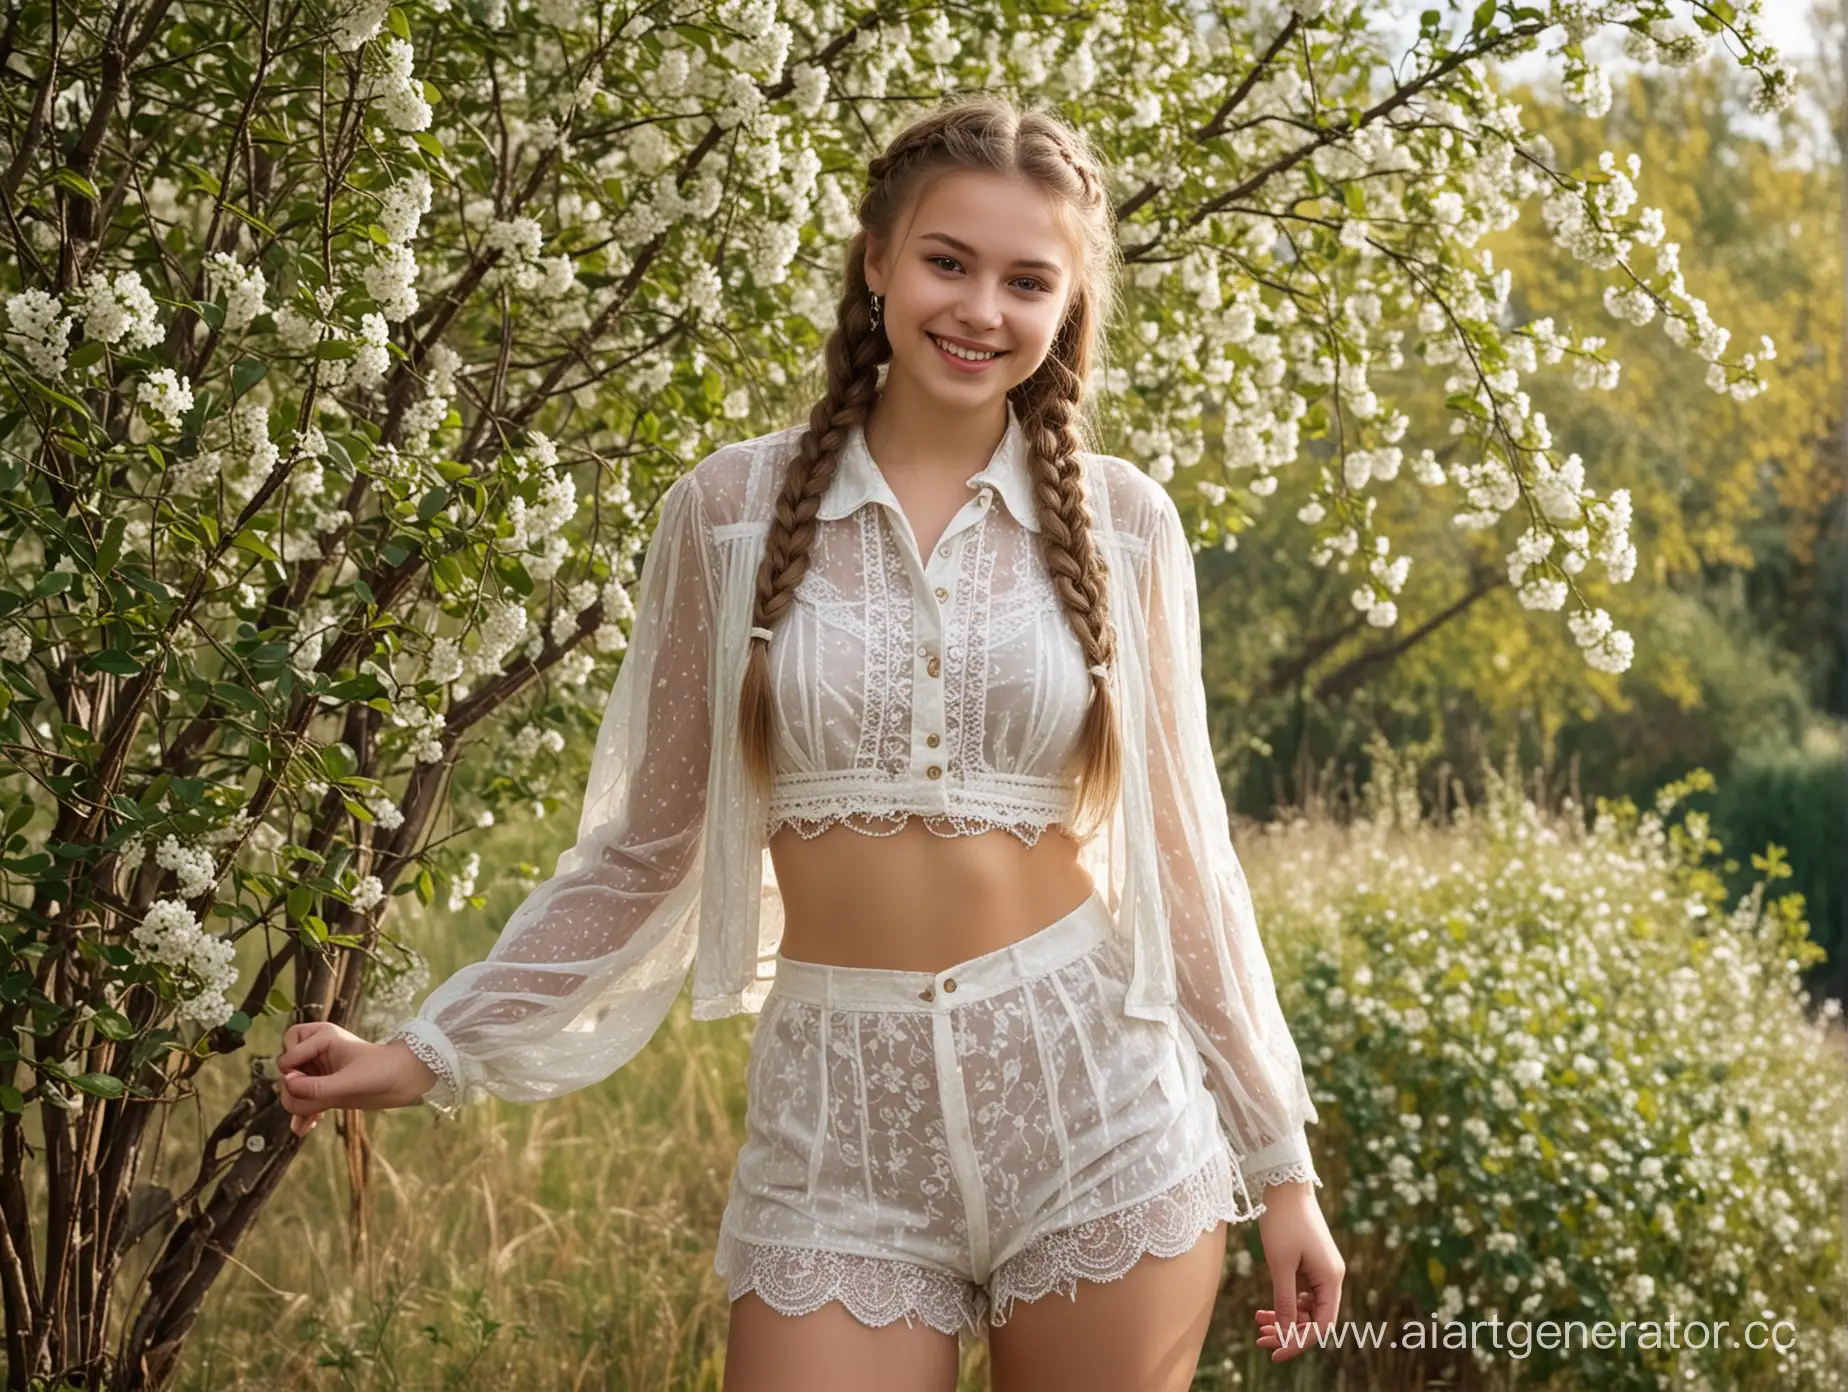 Smiling-Young-Russian-Girl-in-Lace-Shorts-and-Braids-at-Country-House-with-Cherry-Branches